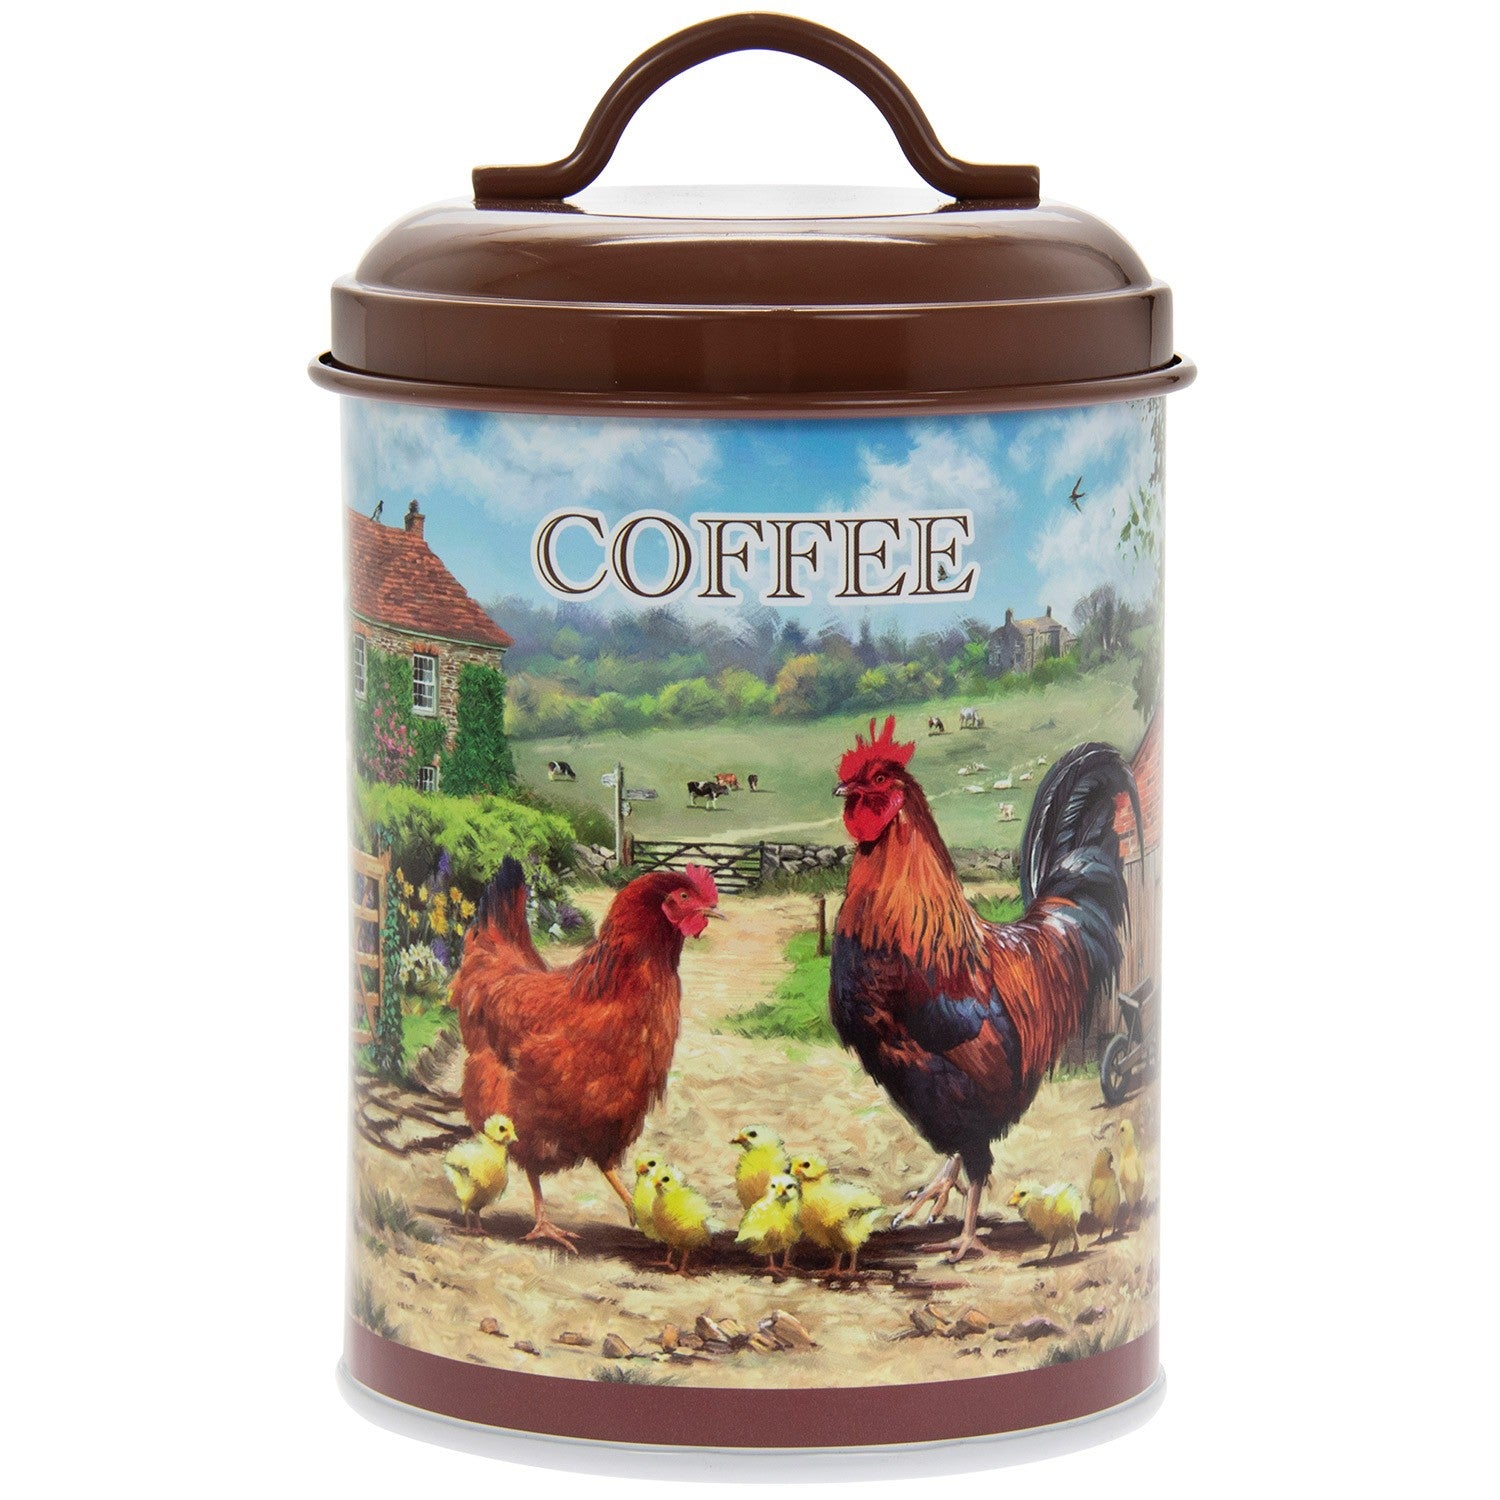 Cockerel & Hen Coffee Canister